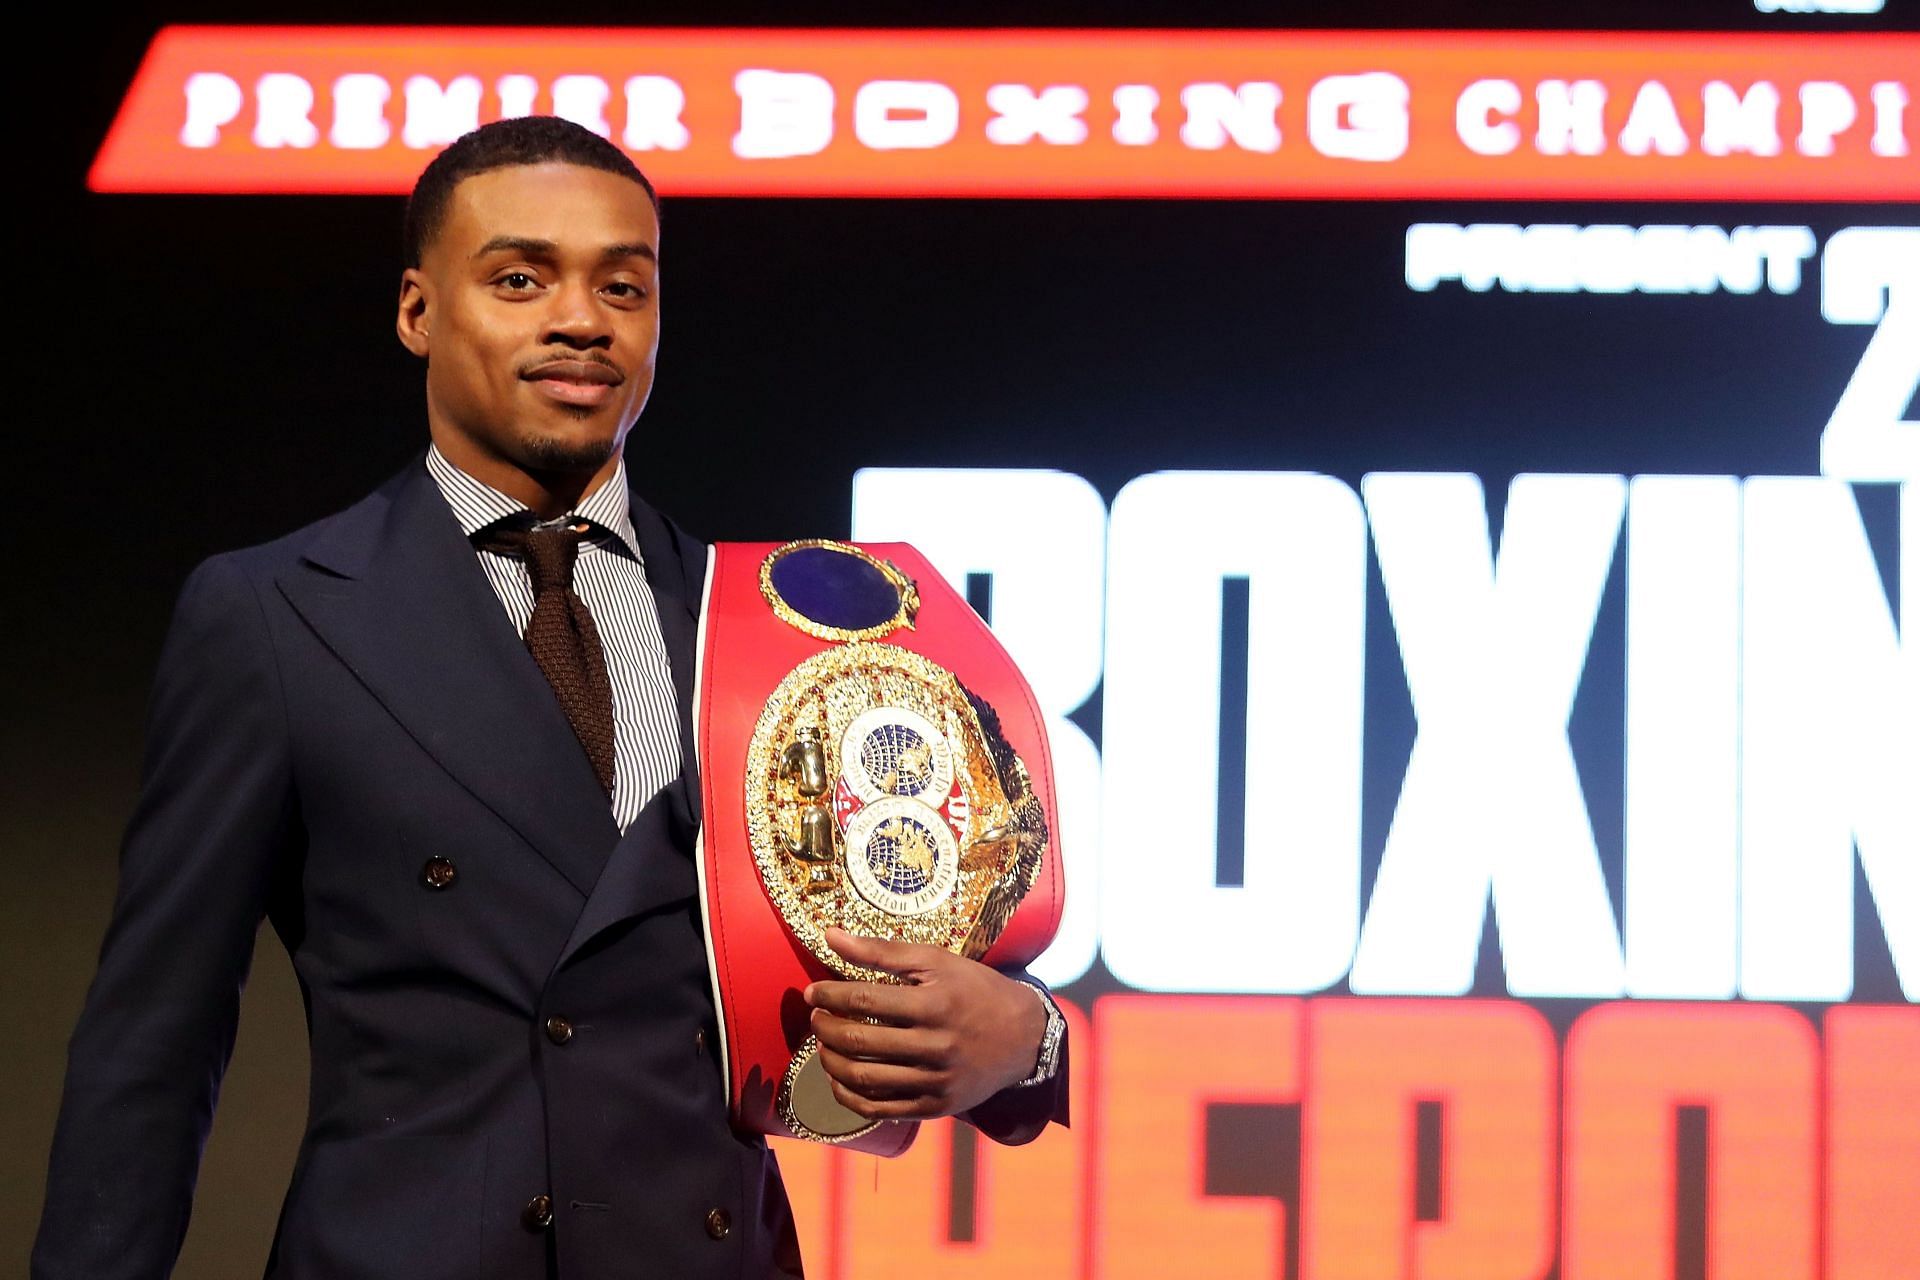 Errol Spence Jr. has given his thoughts on fighters who only try to win by knockout.